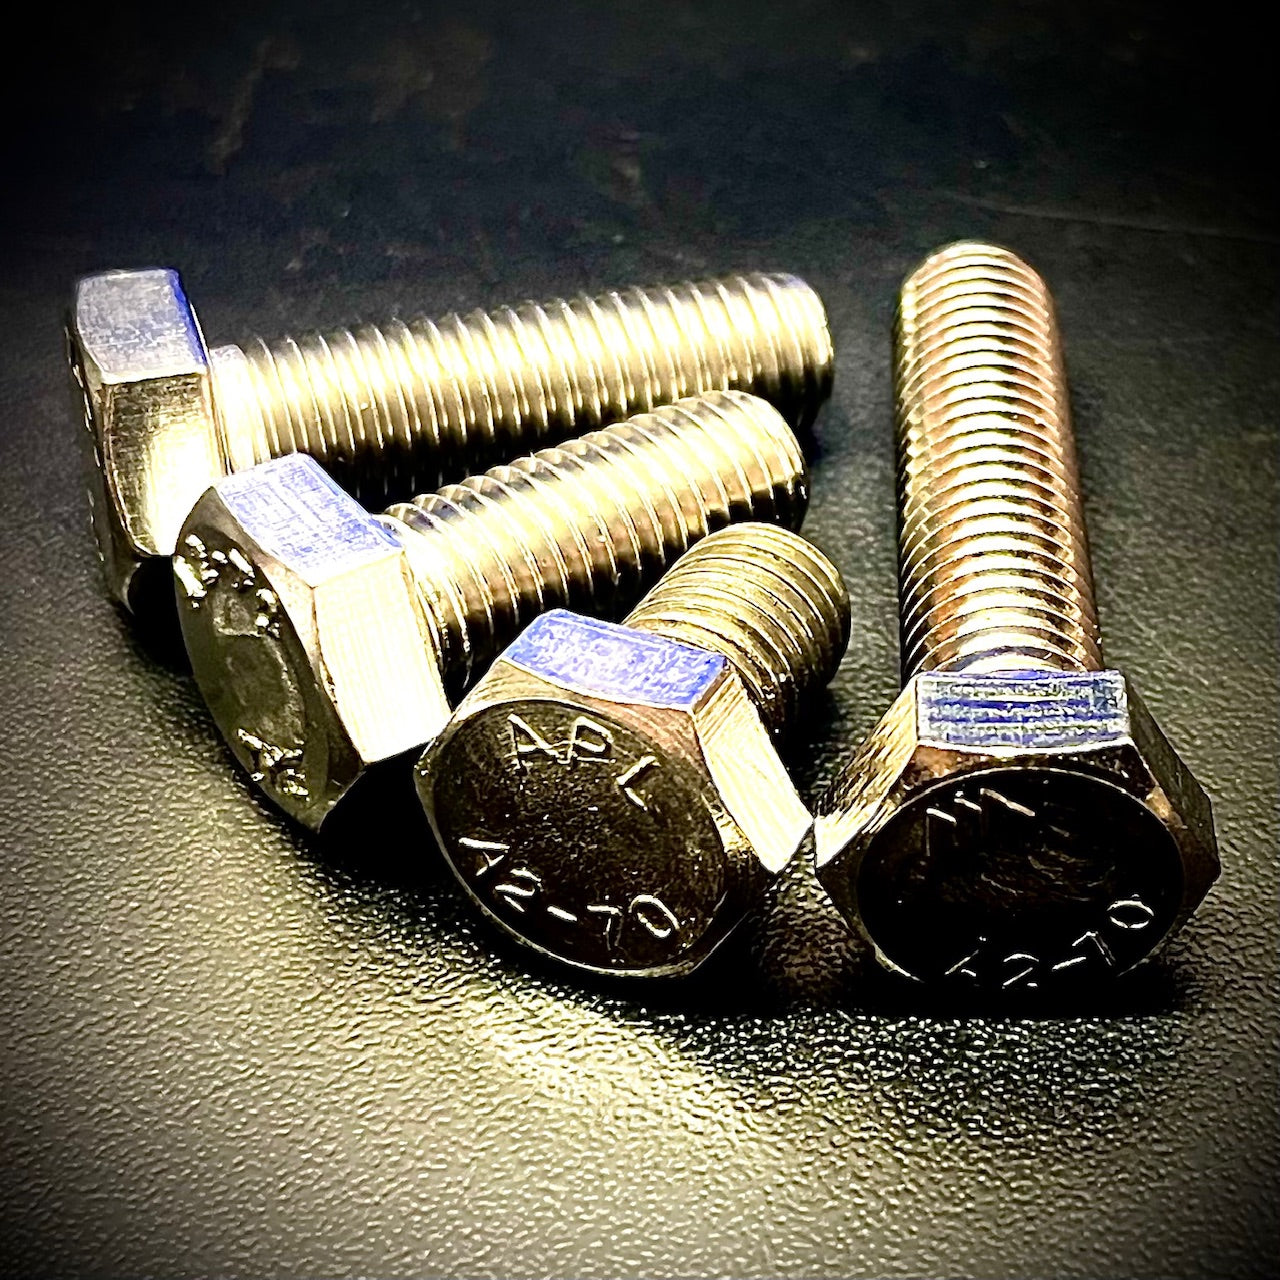 M18 x Under 70mm Hex Set Screw A2 304 Stainless Steel - Fixaball Ltd. Fixings and Fasteners UK